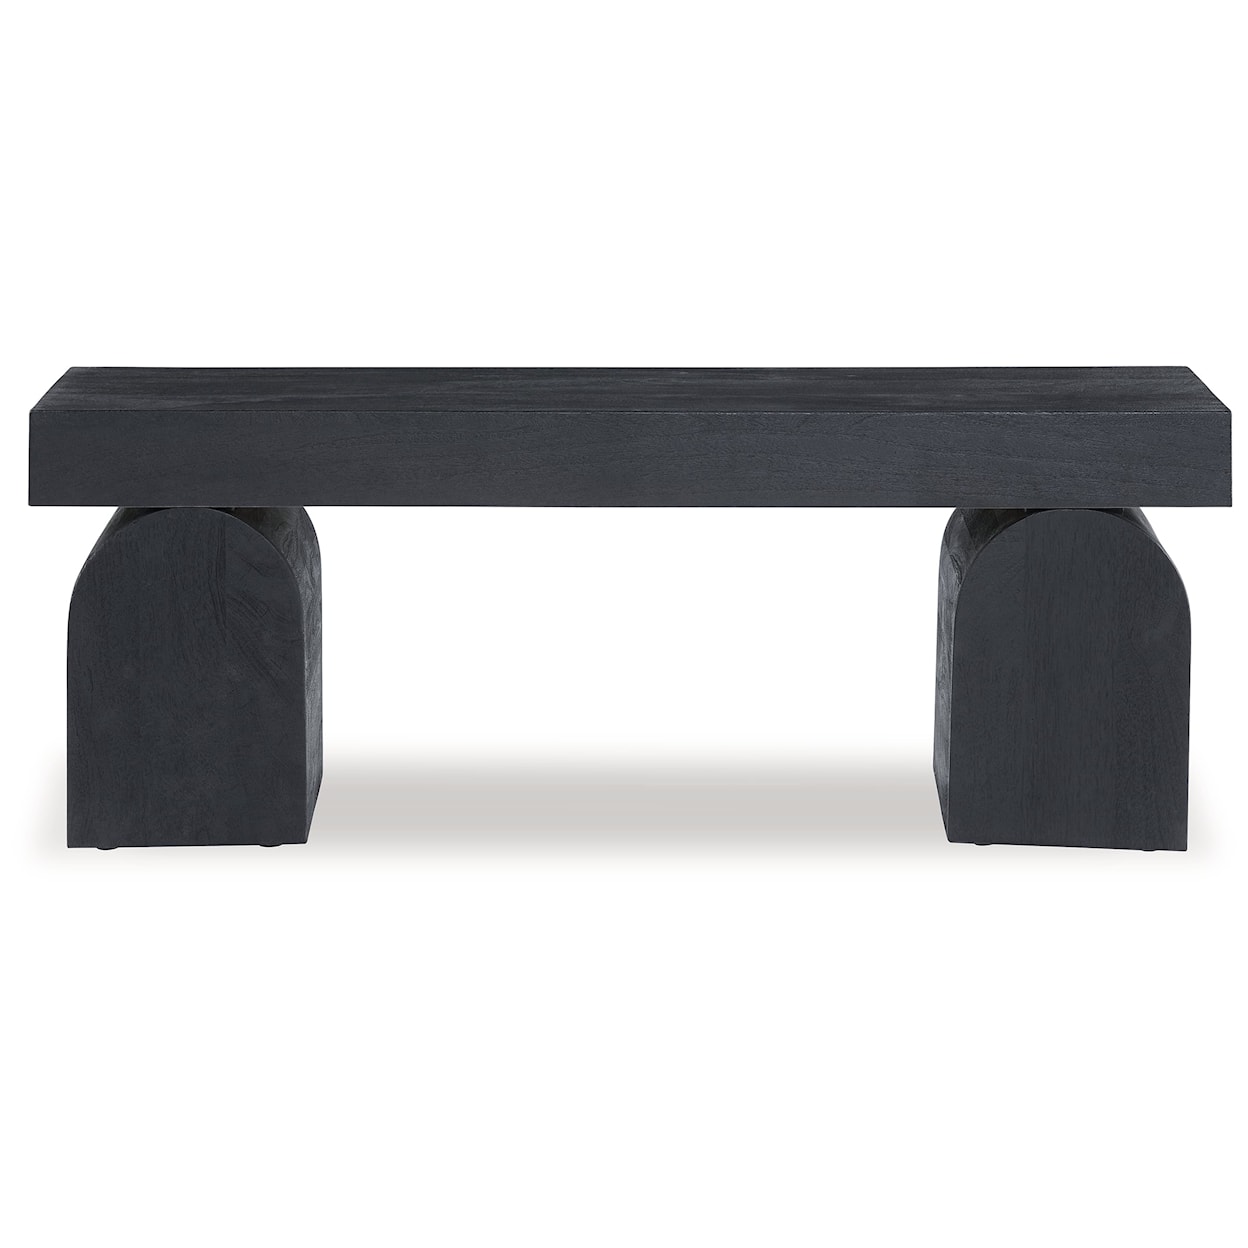 Benchcraft Holgrove Accent Bench